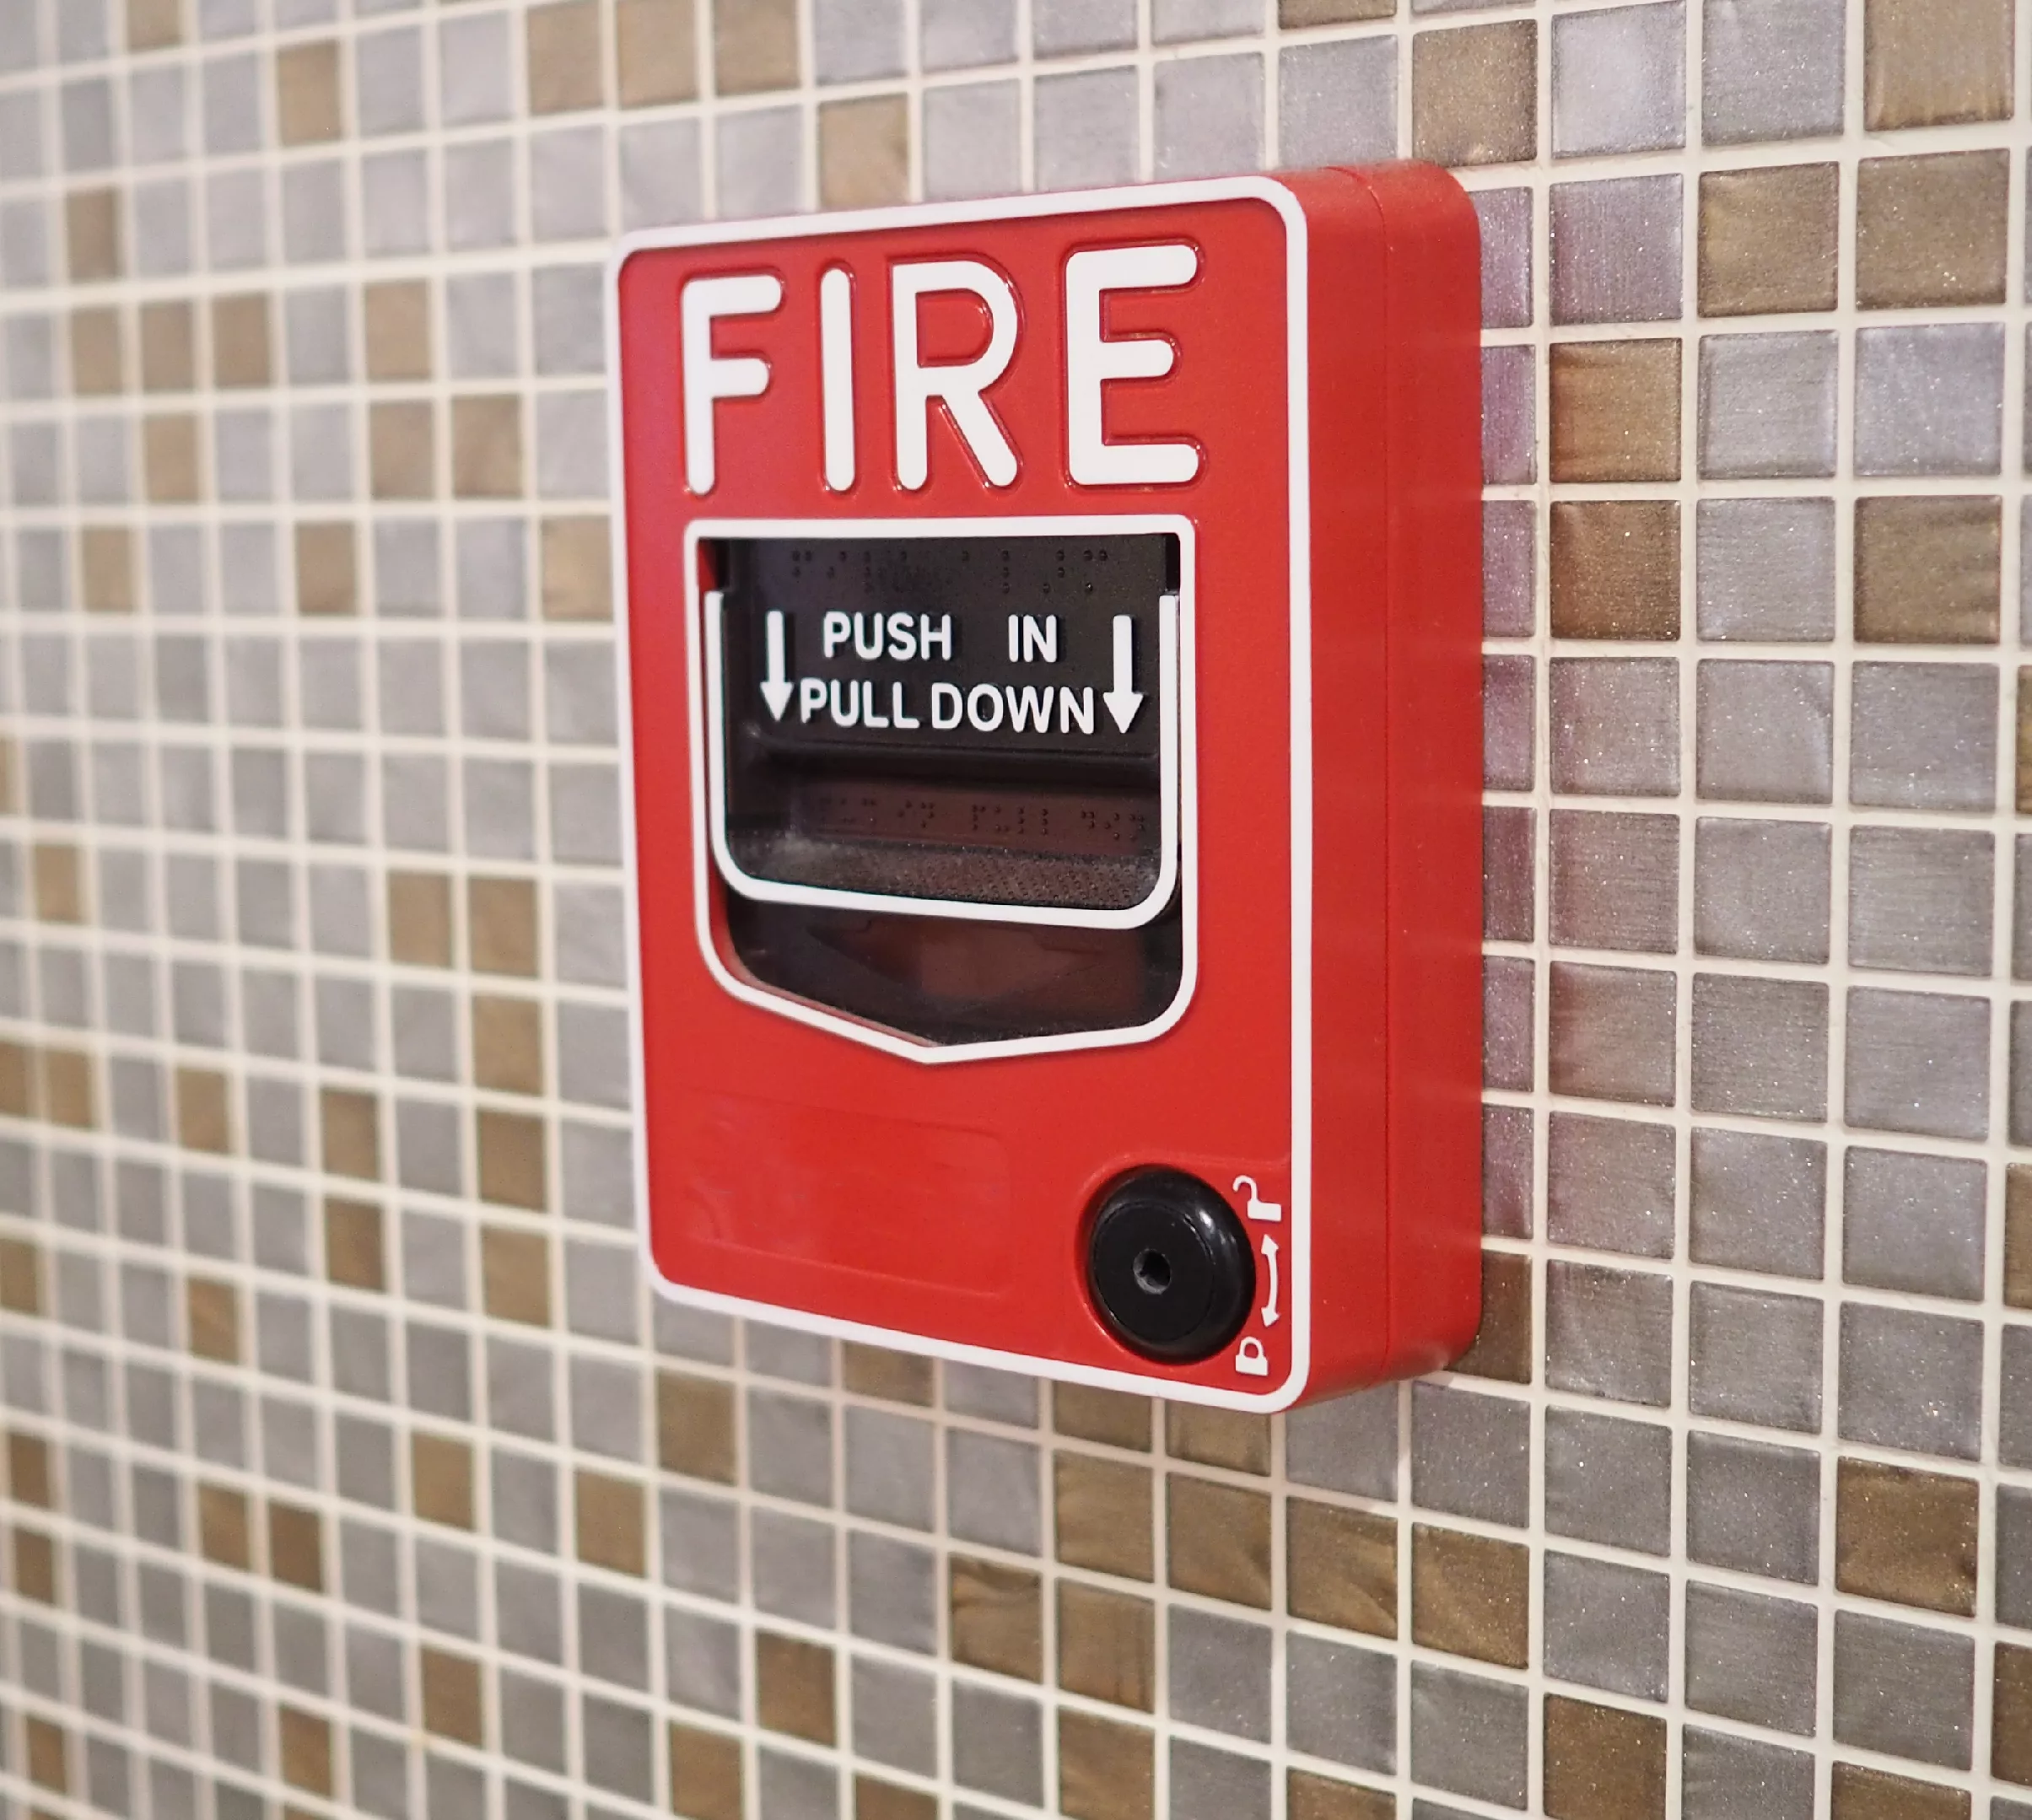 Wall mounted pull fire alarm that passed inspection